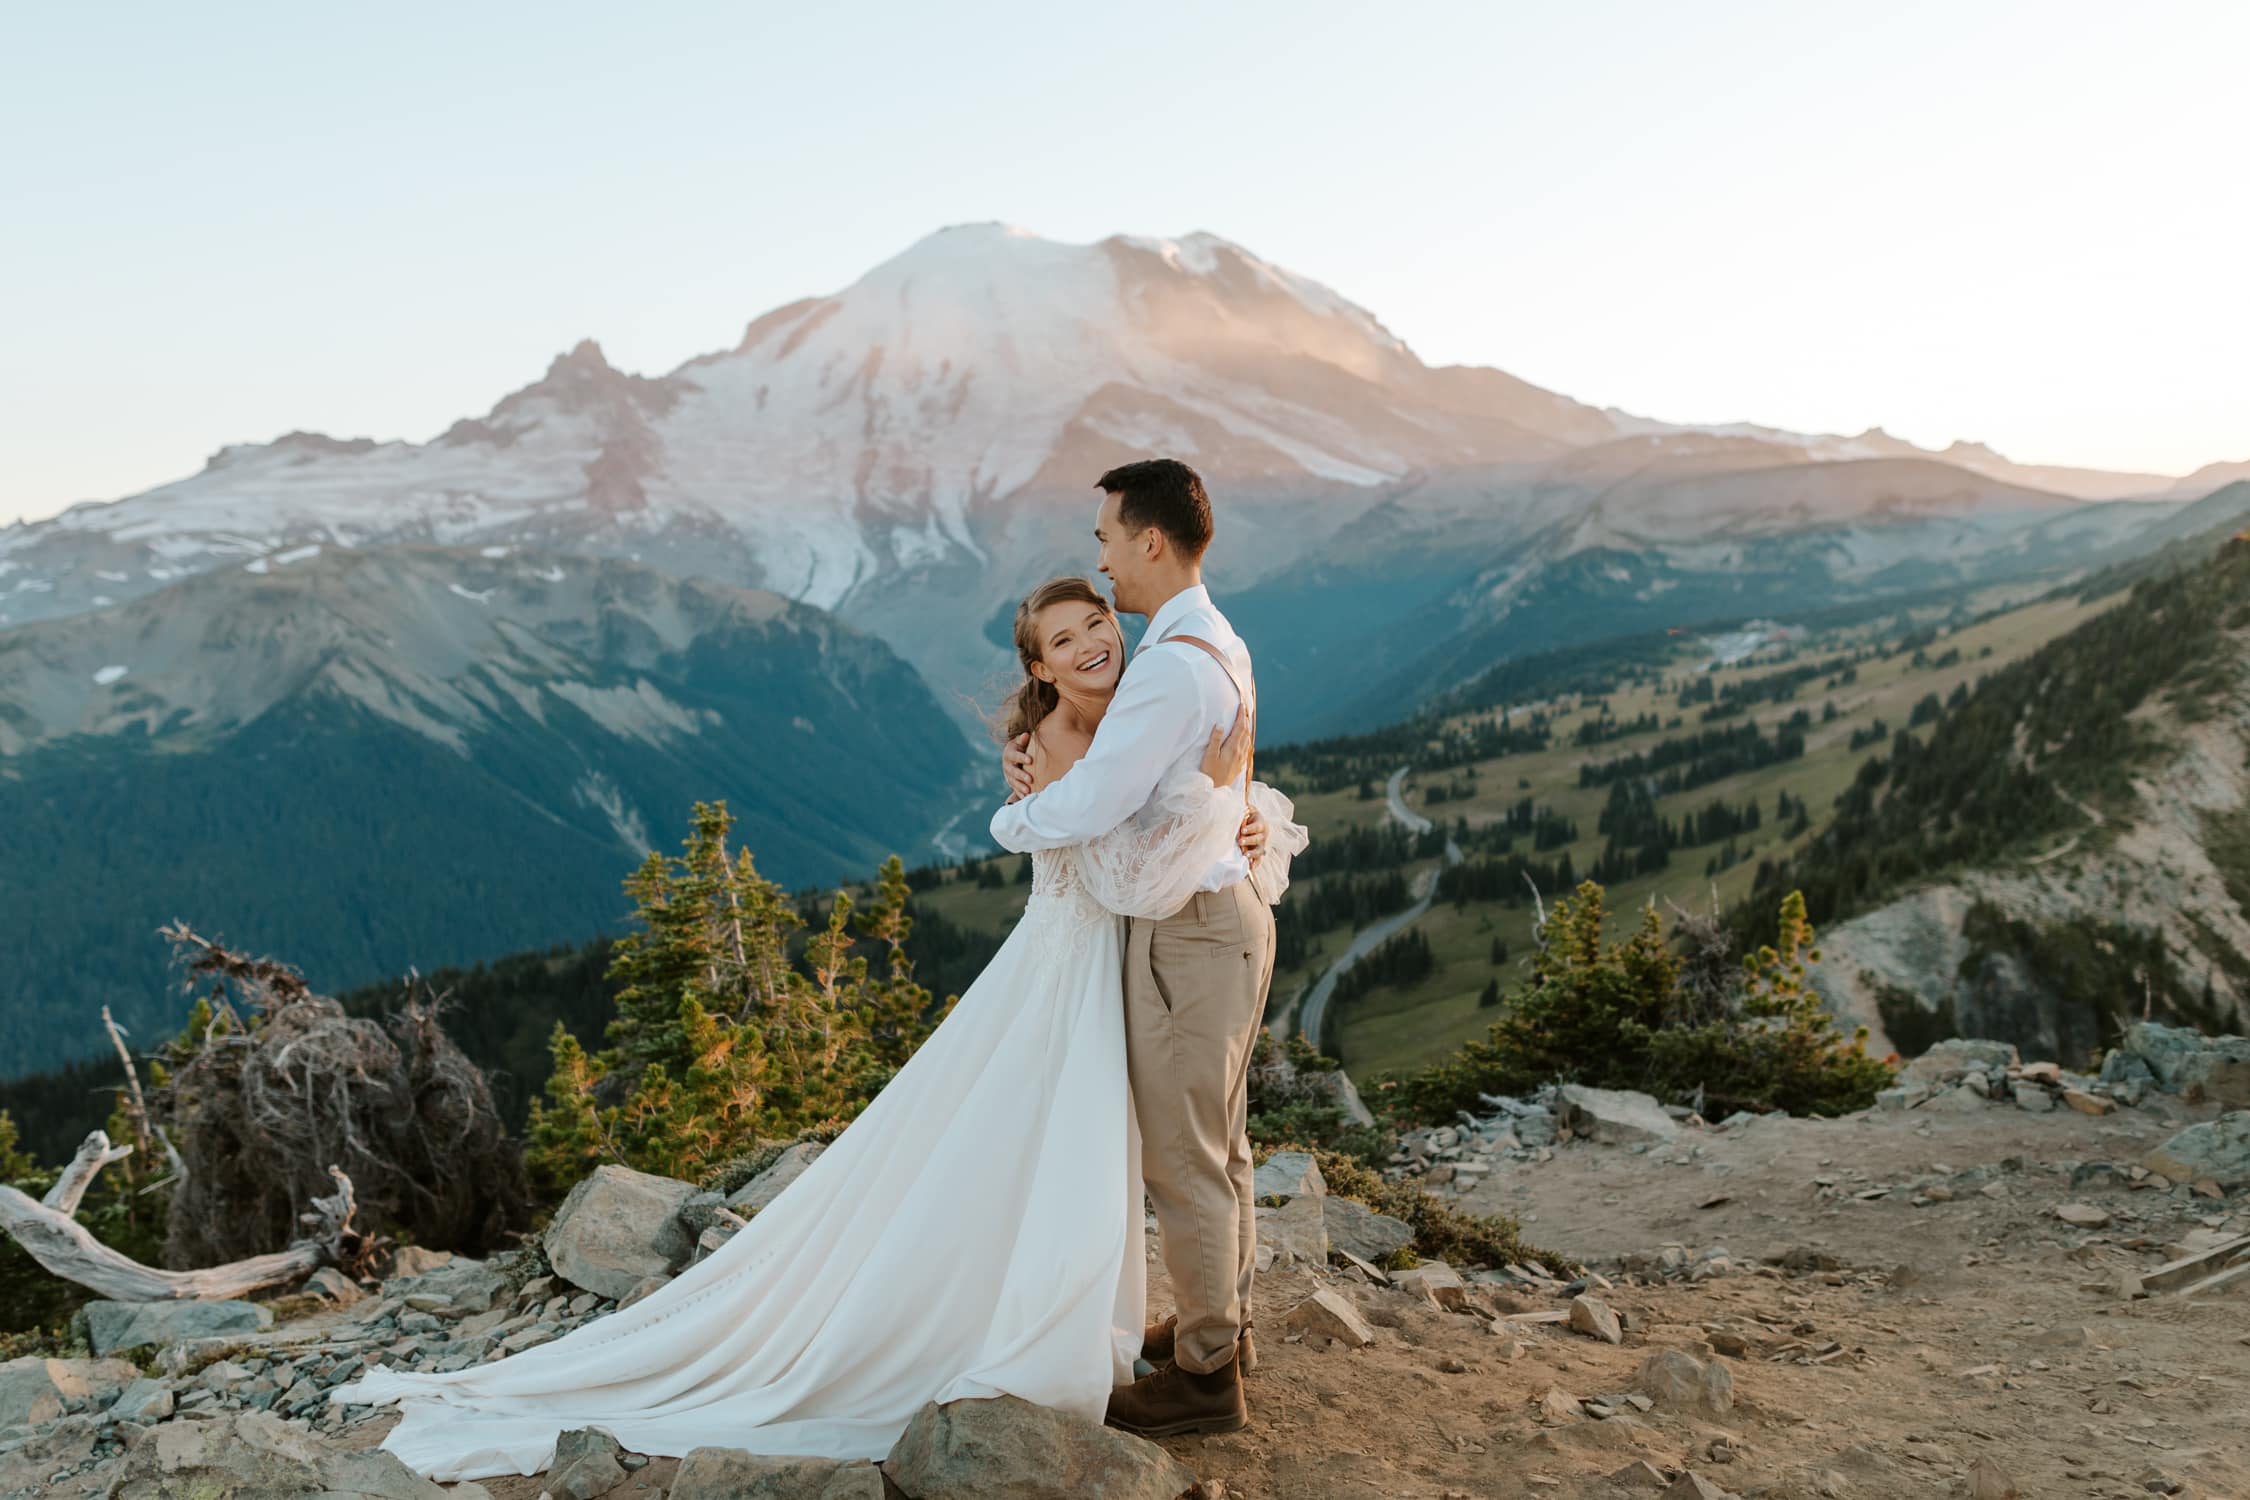 A couple in wedding attire hugging and laughing in front of Mt. Rainier.